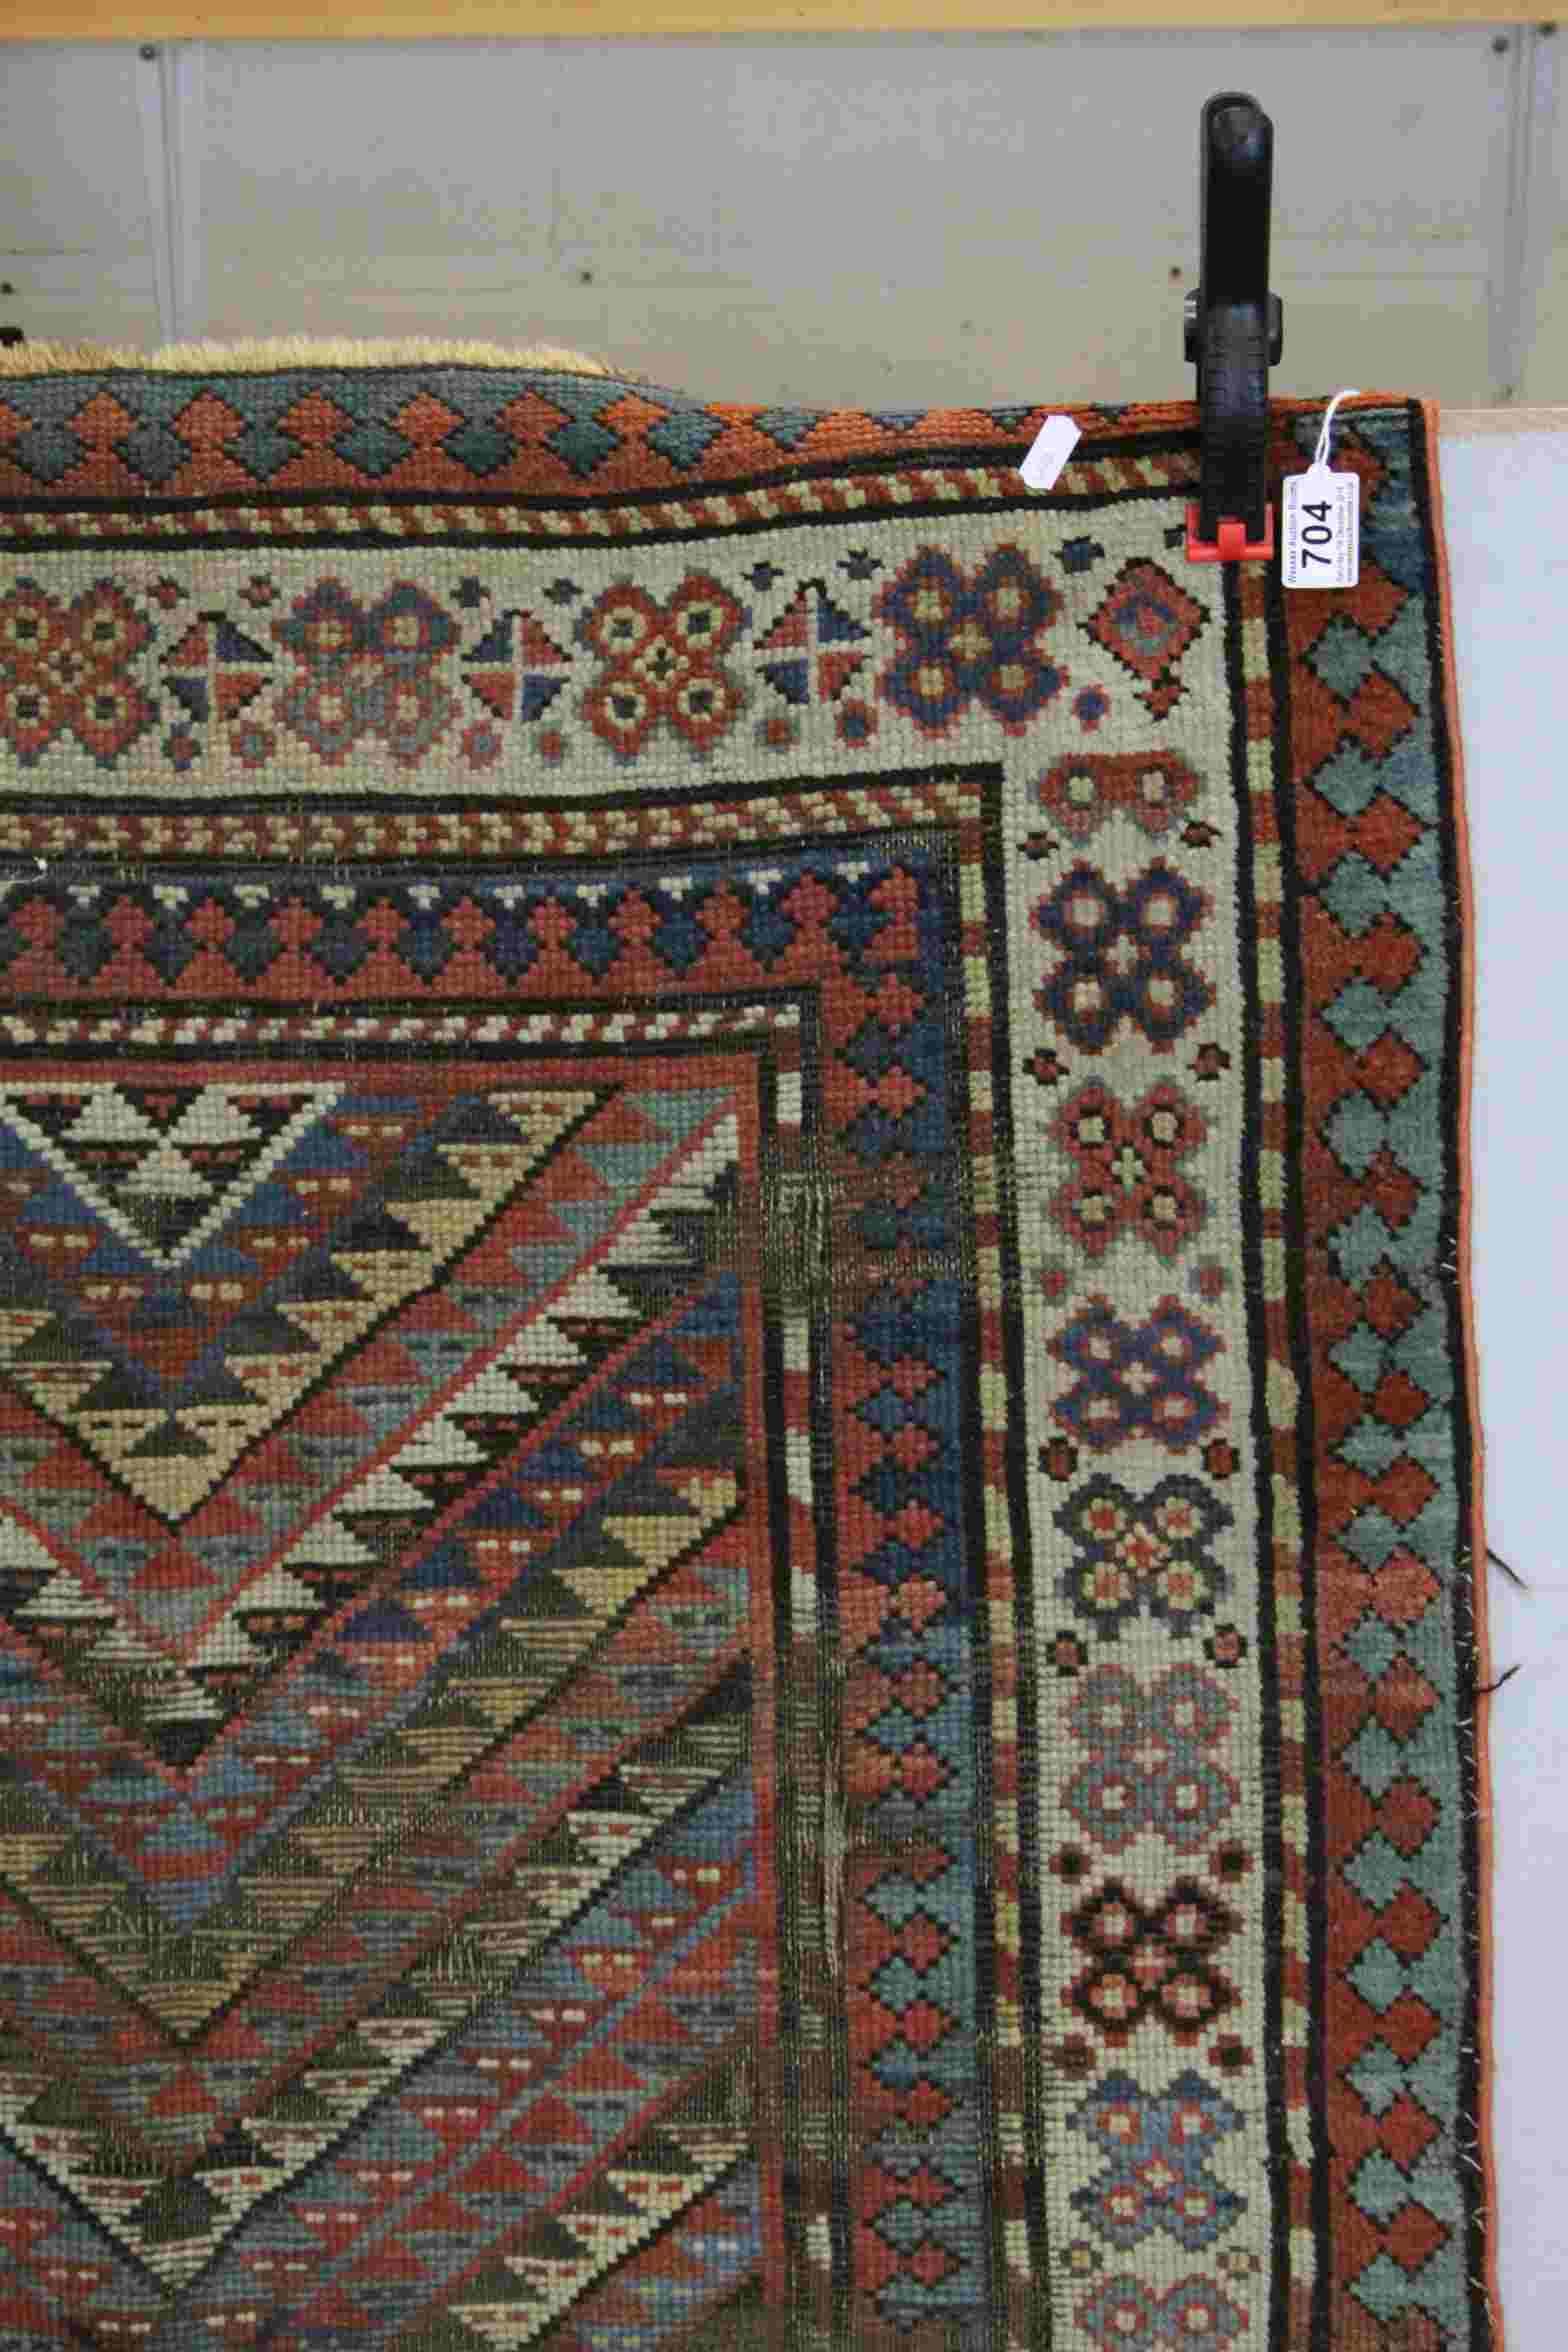 Eastern Red and Blue Ground Rug 300cms x 125cms together with another Rug 182cms x 86cms - Image 7 of 9